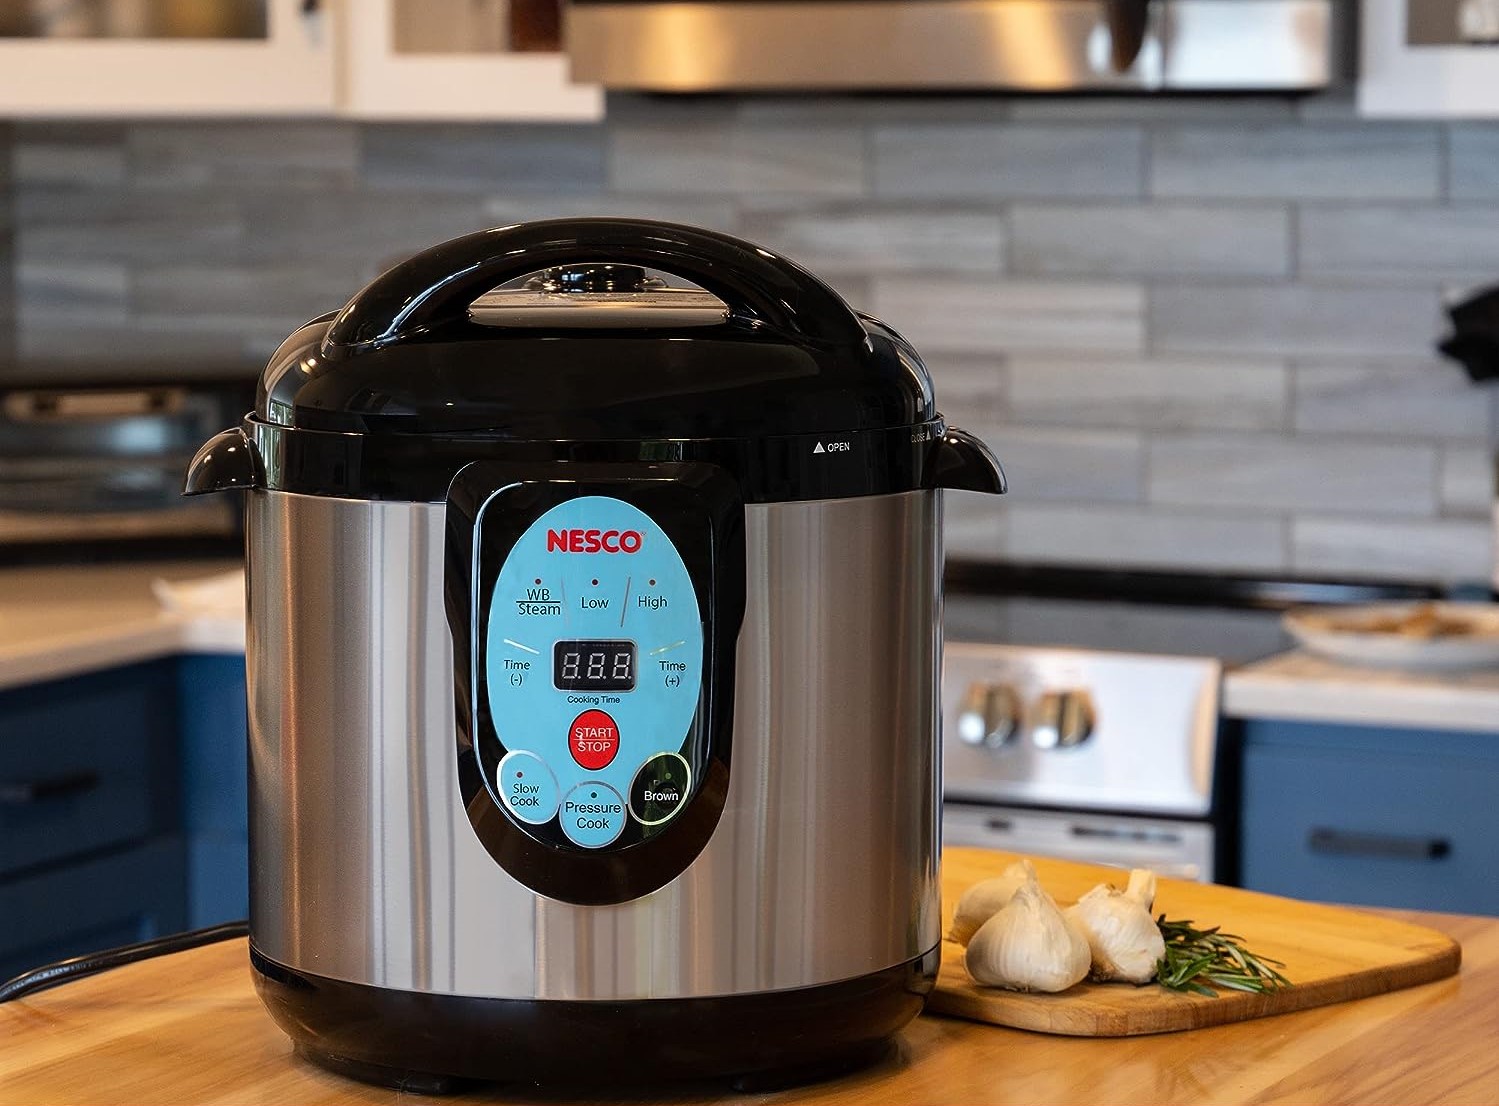 How To Use The Nesco Electric Pressure Cooker